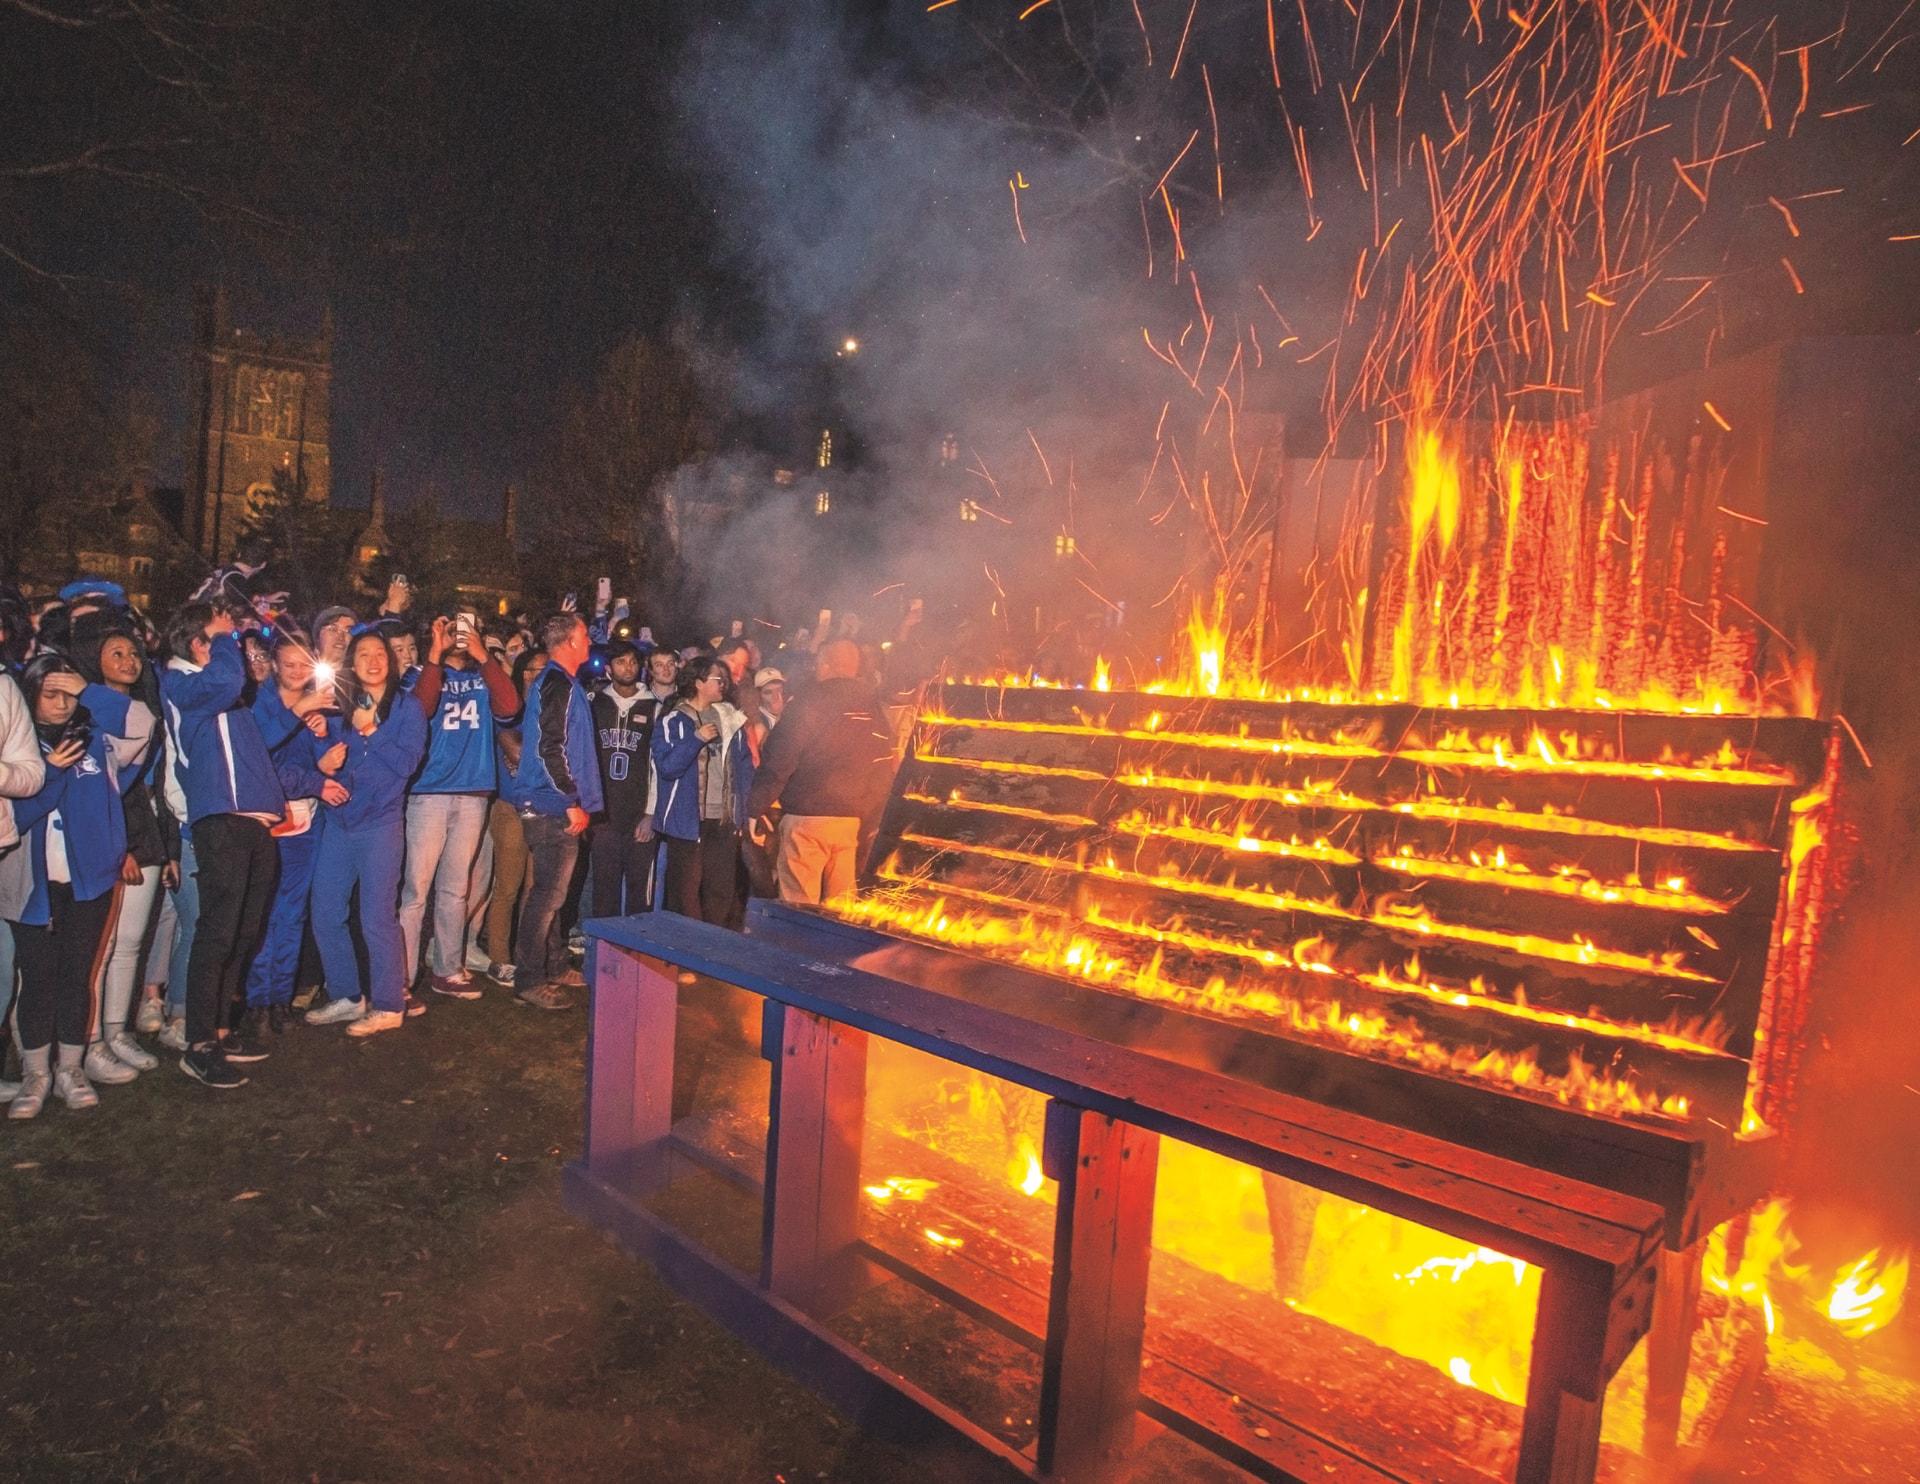 THUMBNAIL: Students light up the benches after a win over UNC in February 2022.